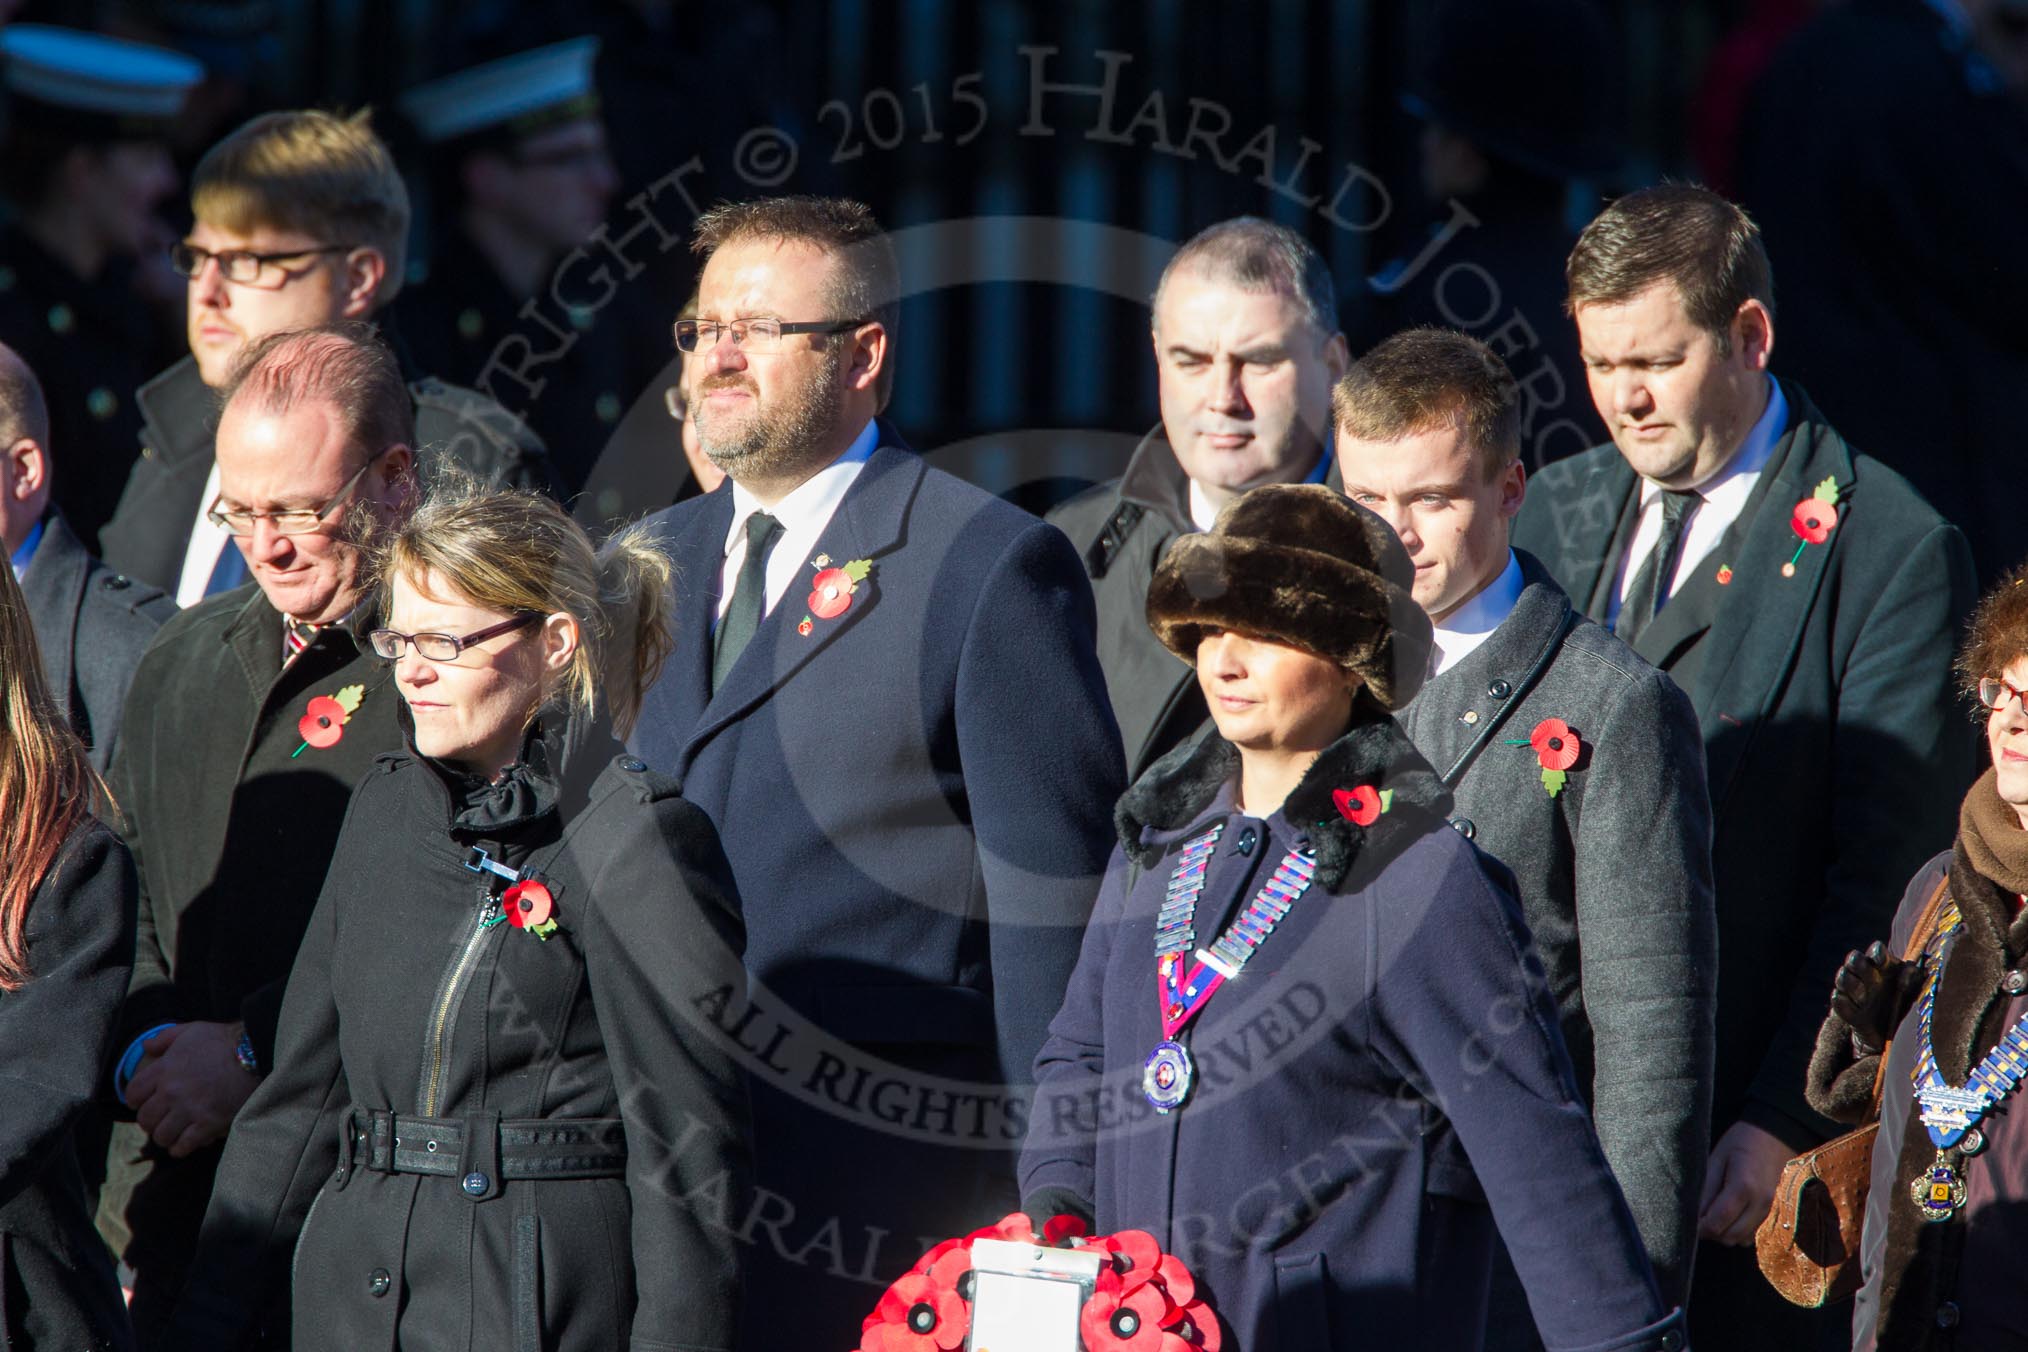 Remembrance Sunday Cenotaph March Past 2013: M39 - National Association of Round Tables..
Press stand opposite the Foreign Office building, Whitehall, London SW1,
London,
Greater London,
United Kingdom,
on 10 November 2013 at 12:14, image #2175